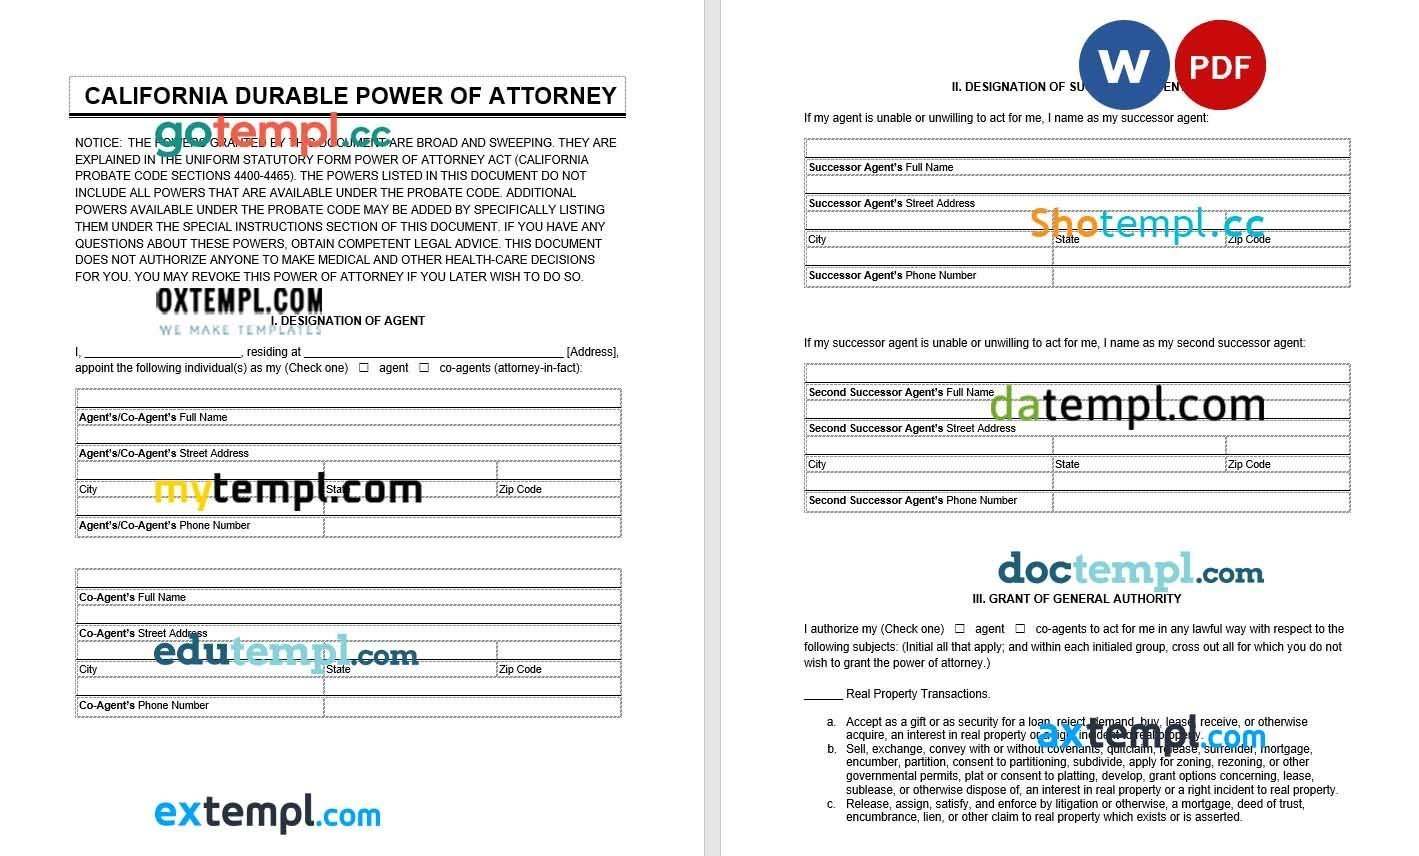 California Durable Power of Attorney example, fully editable